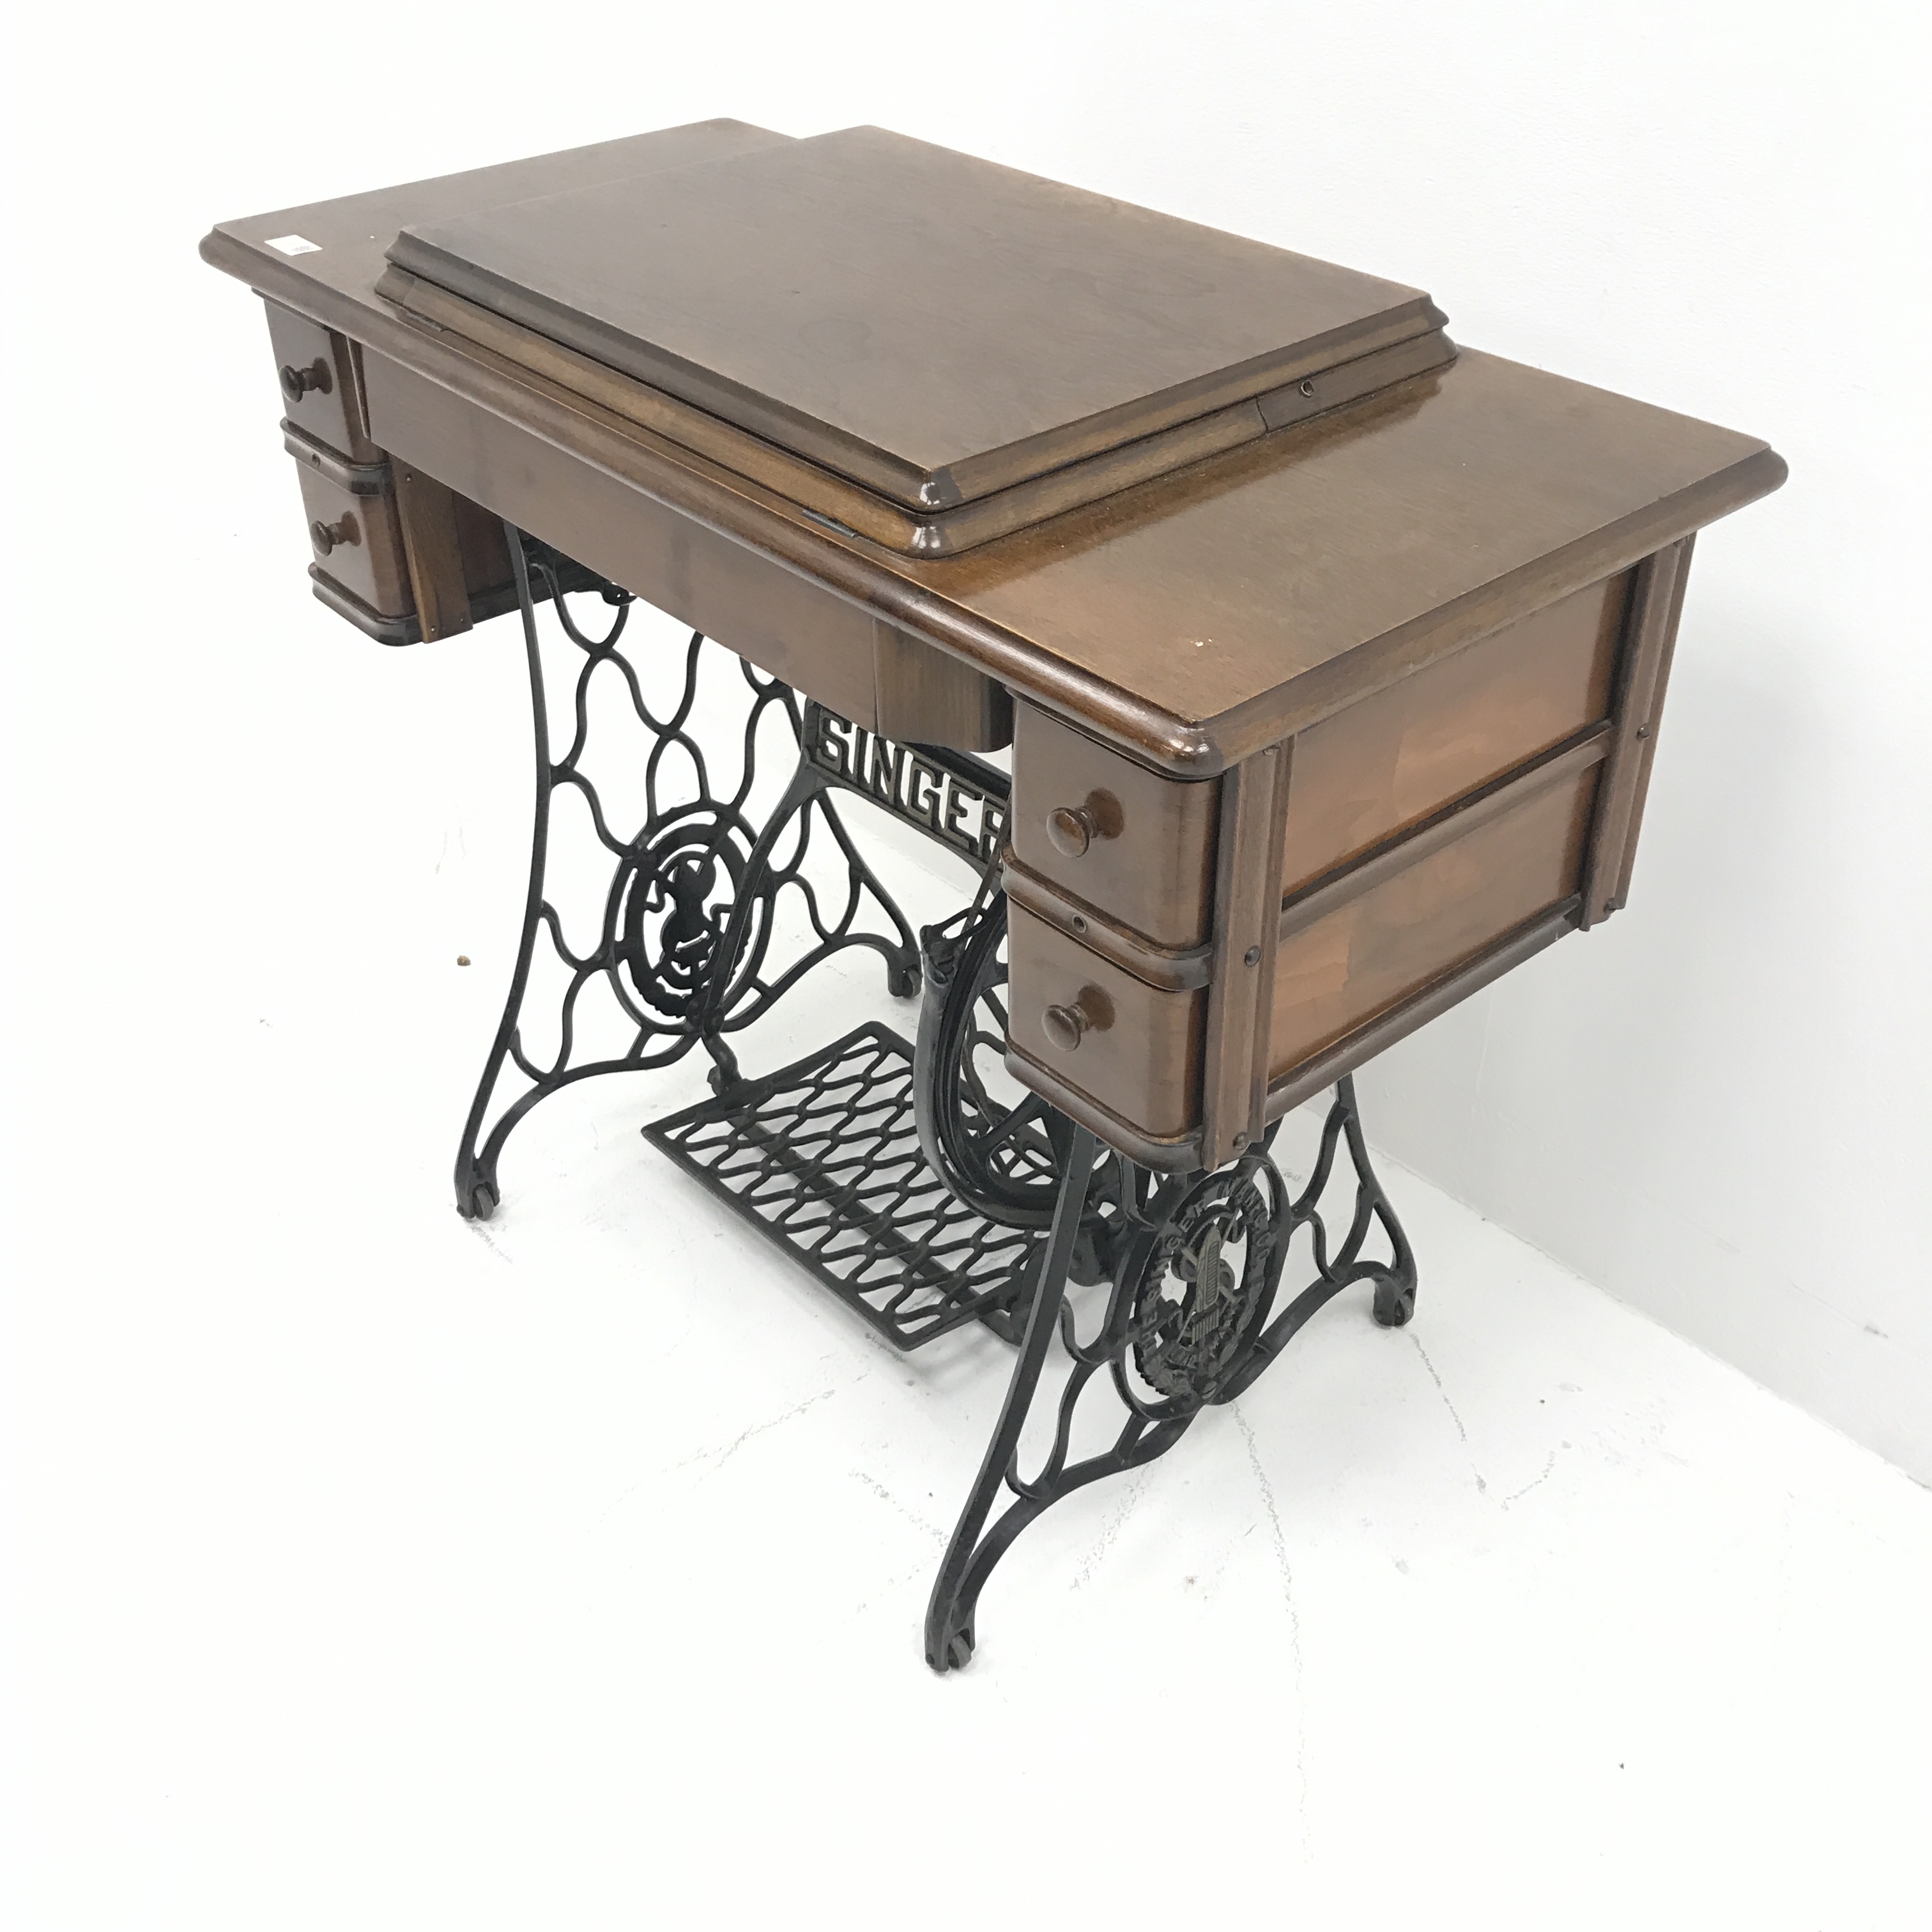 Singer Treadle sewing machine, four drawers, wrought iron base, W91cm, H77cm, D44cm - Image 8 of 10